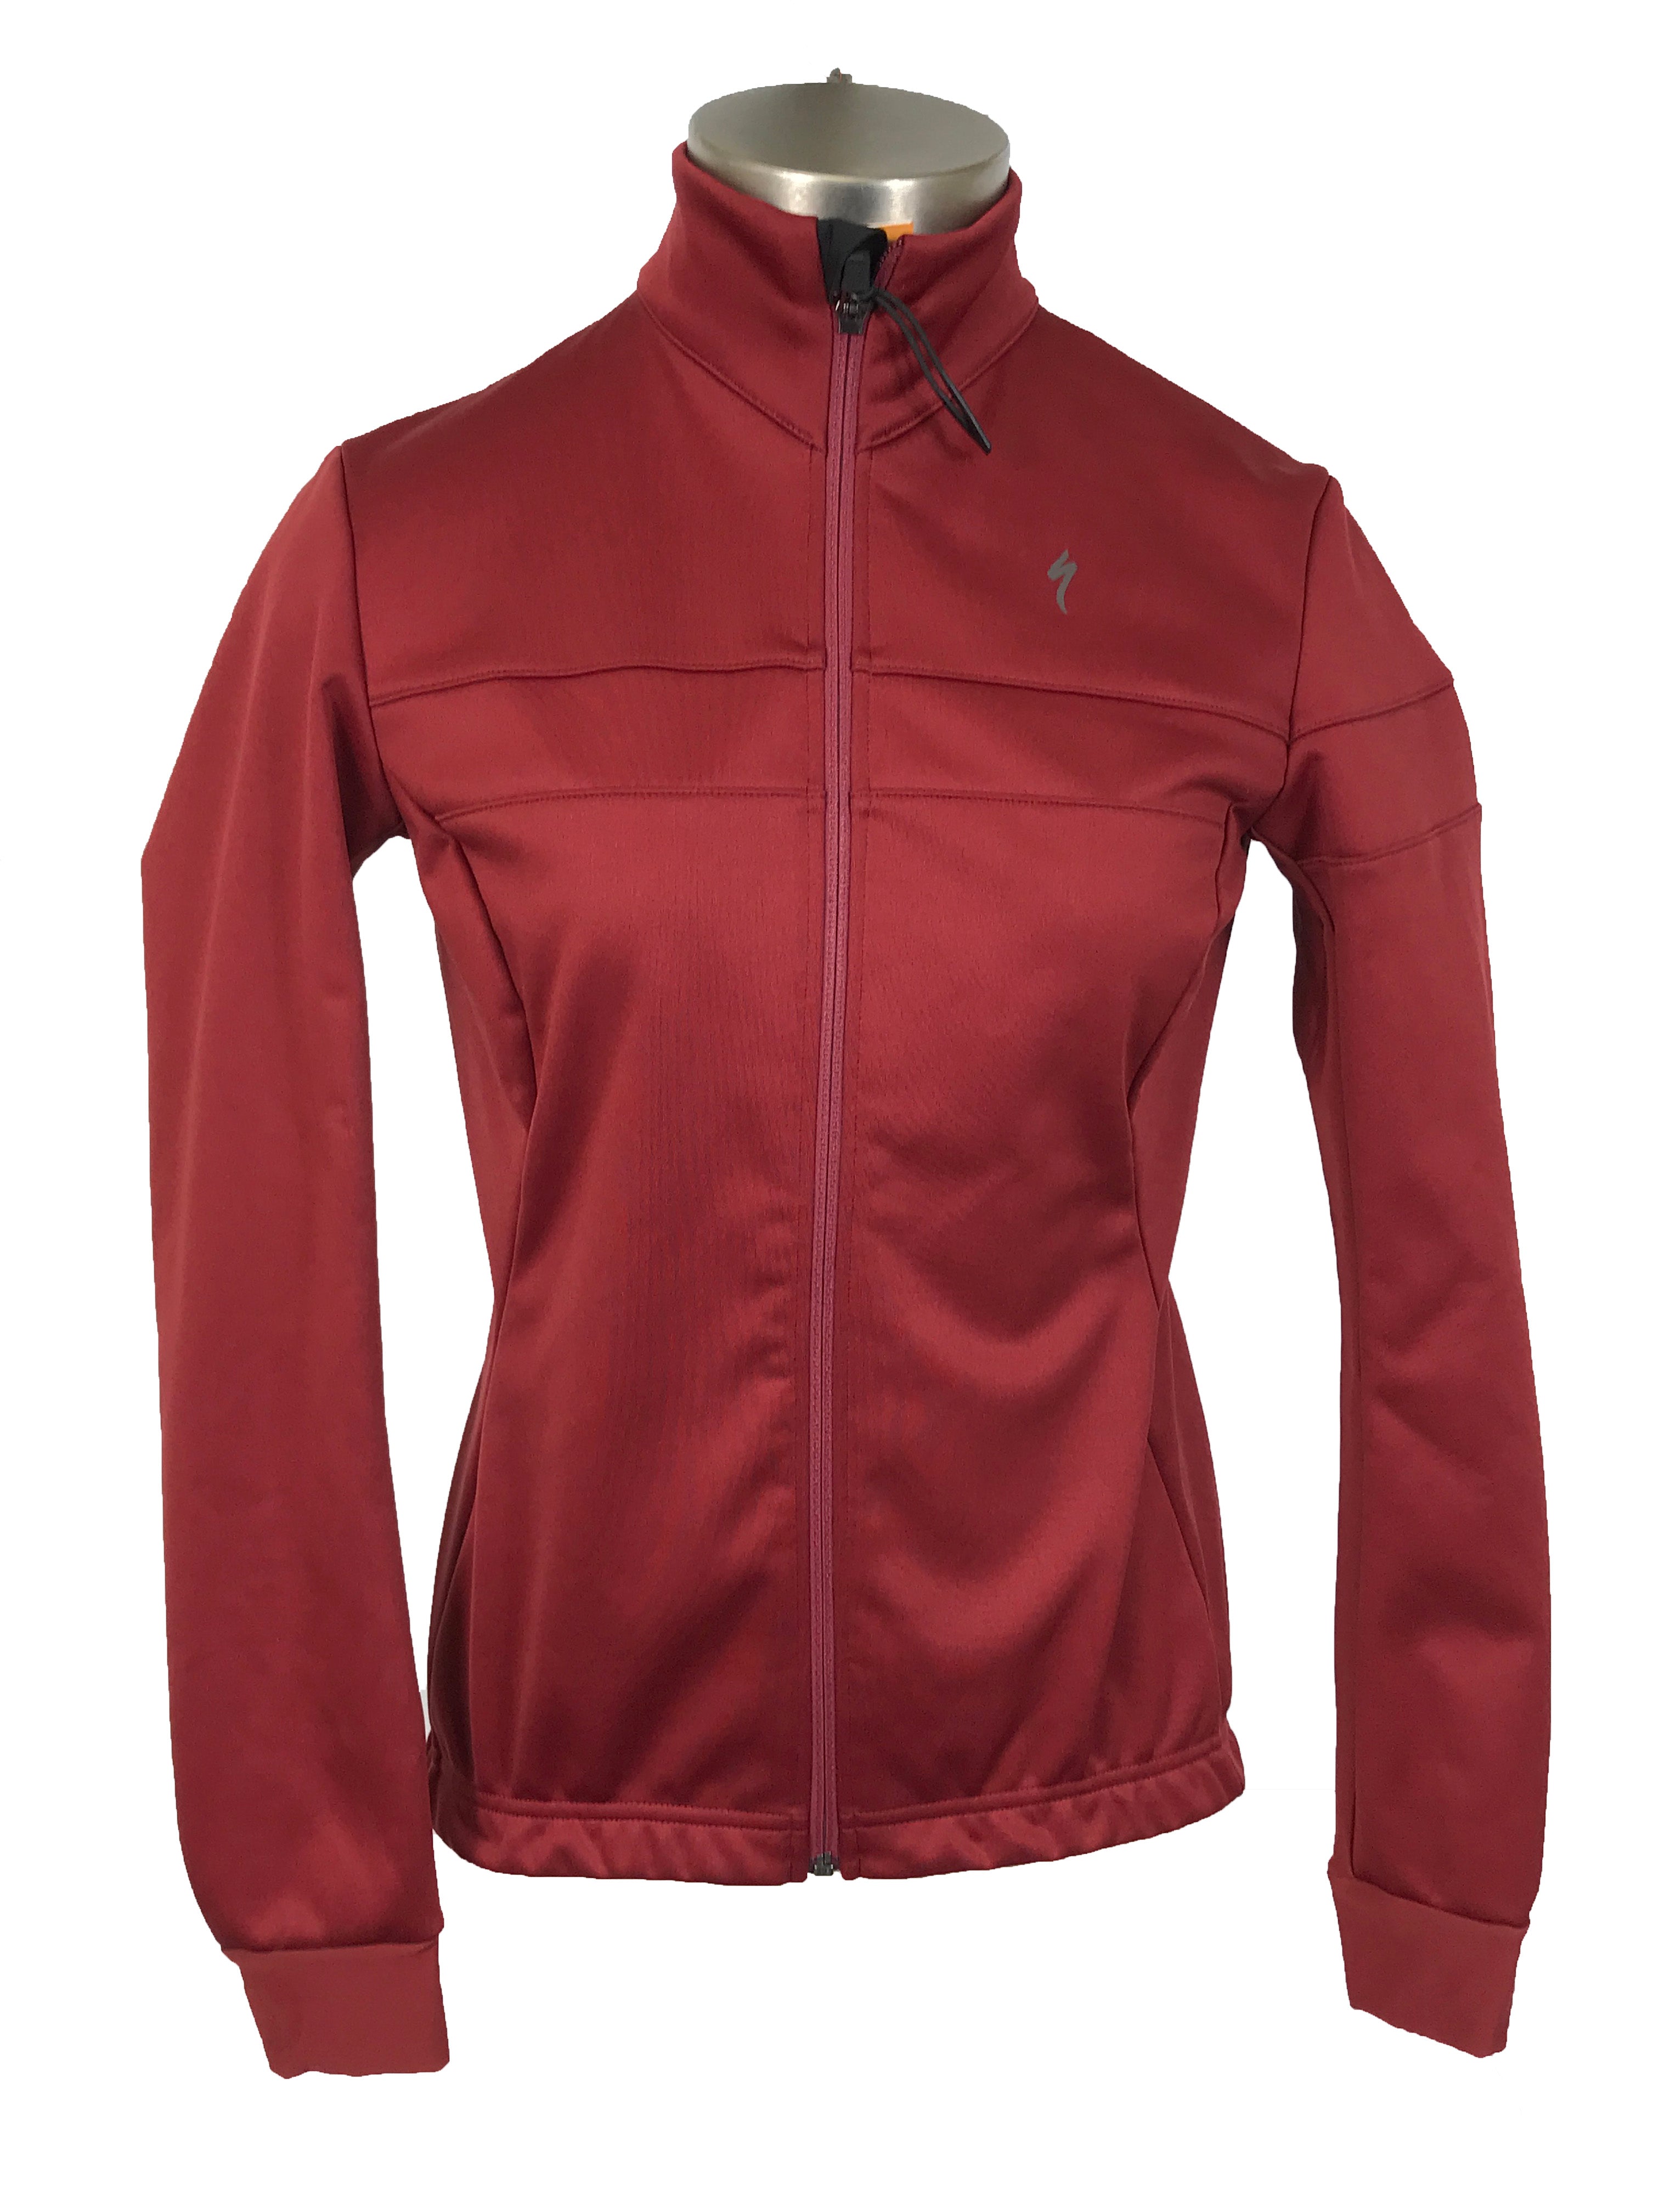 Specialized RBX Comp Maroon Softshell Jacket Women's Size M NWT